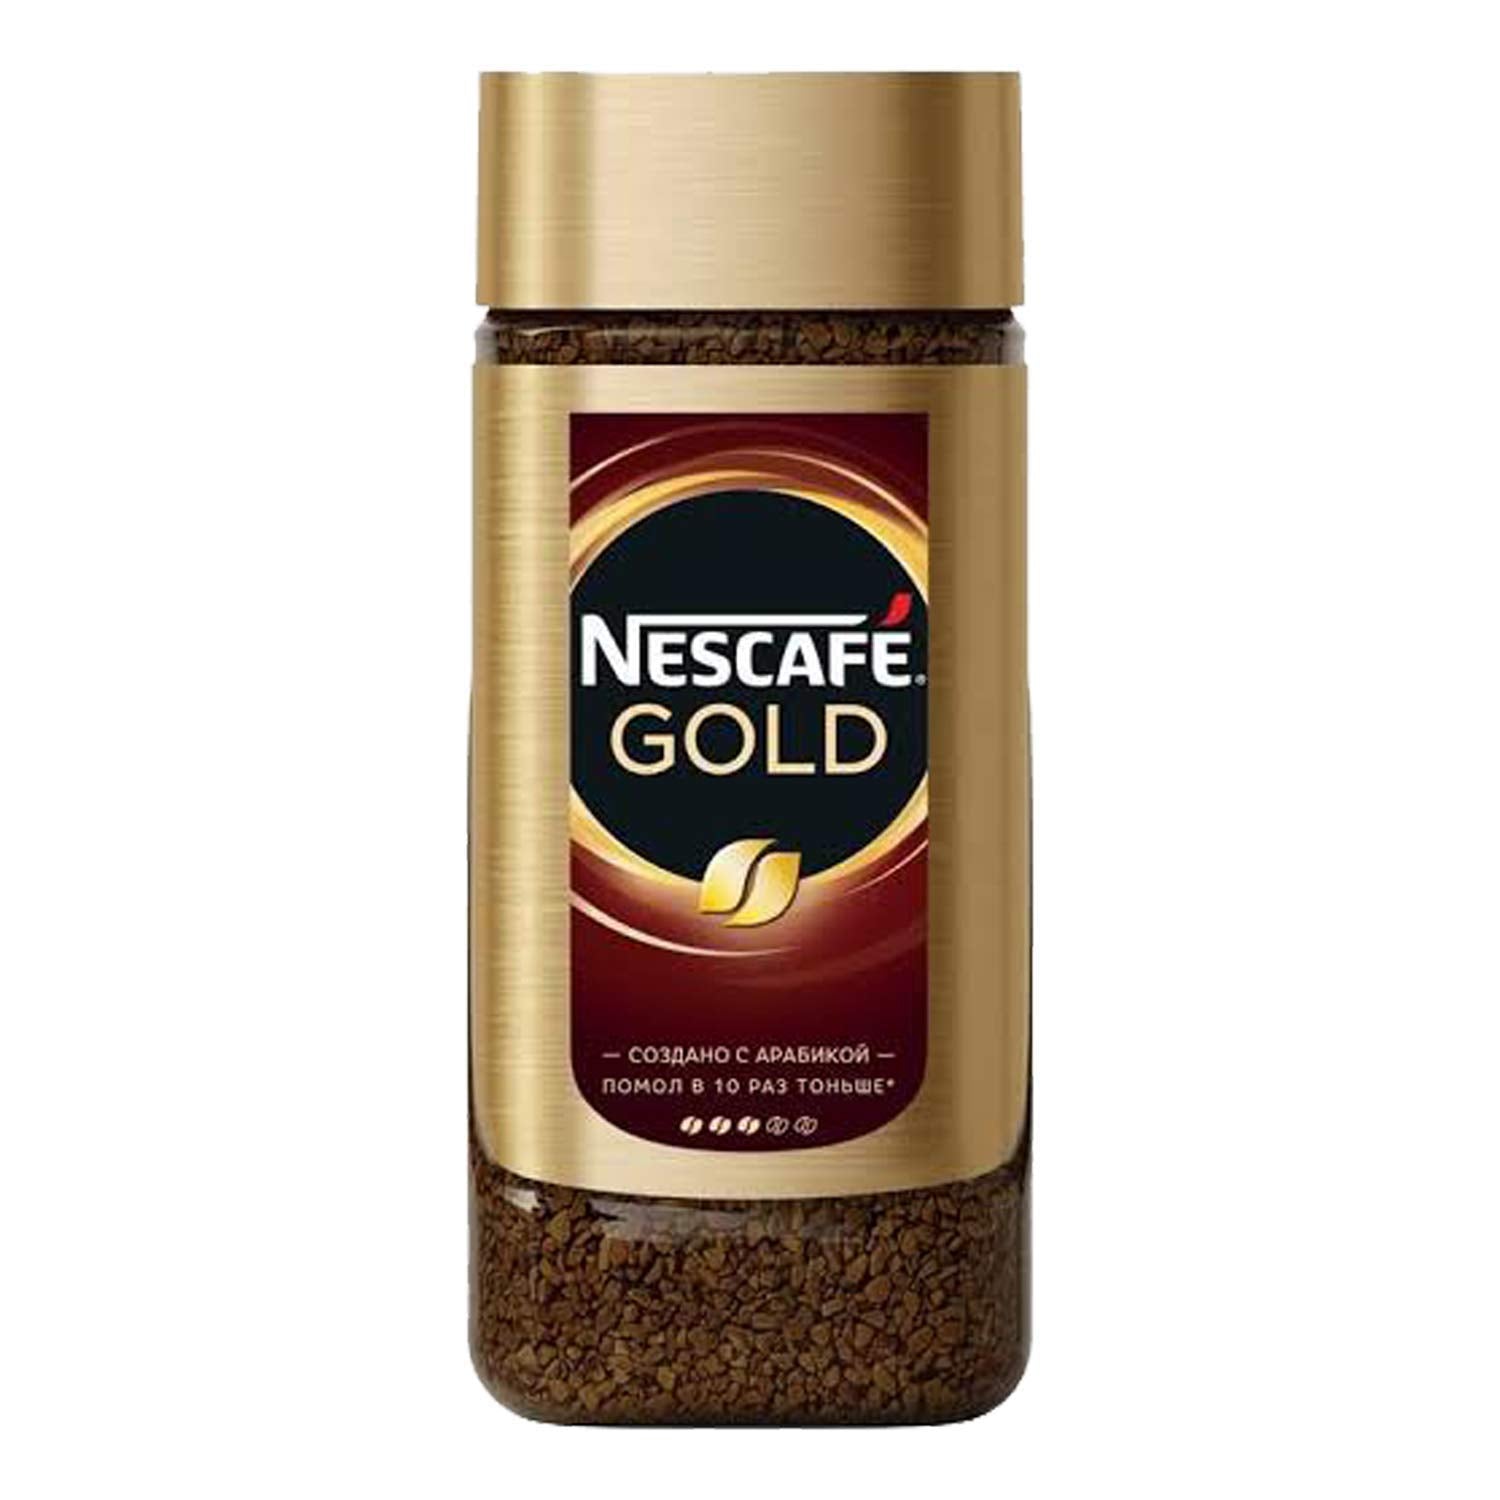 Nescafe Gold Rich and Smooth 95g - Pack of Two